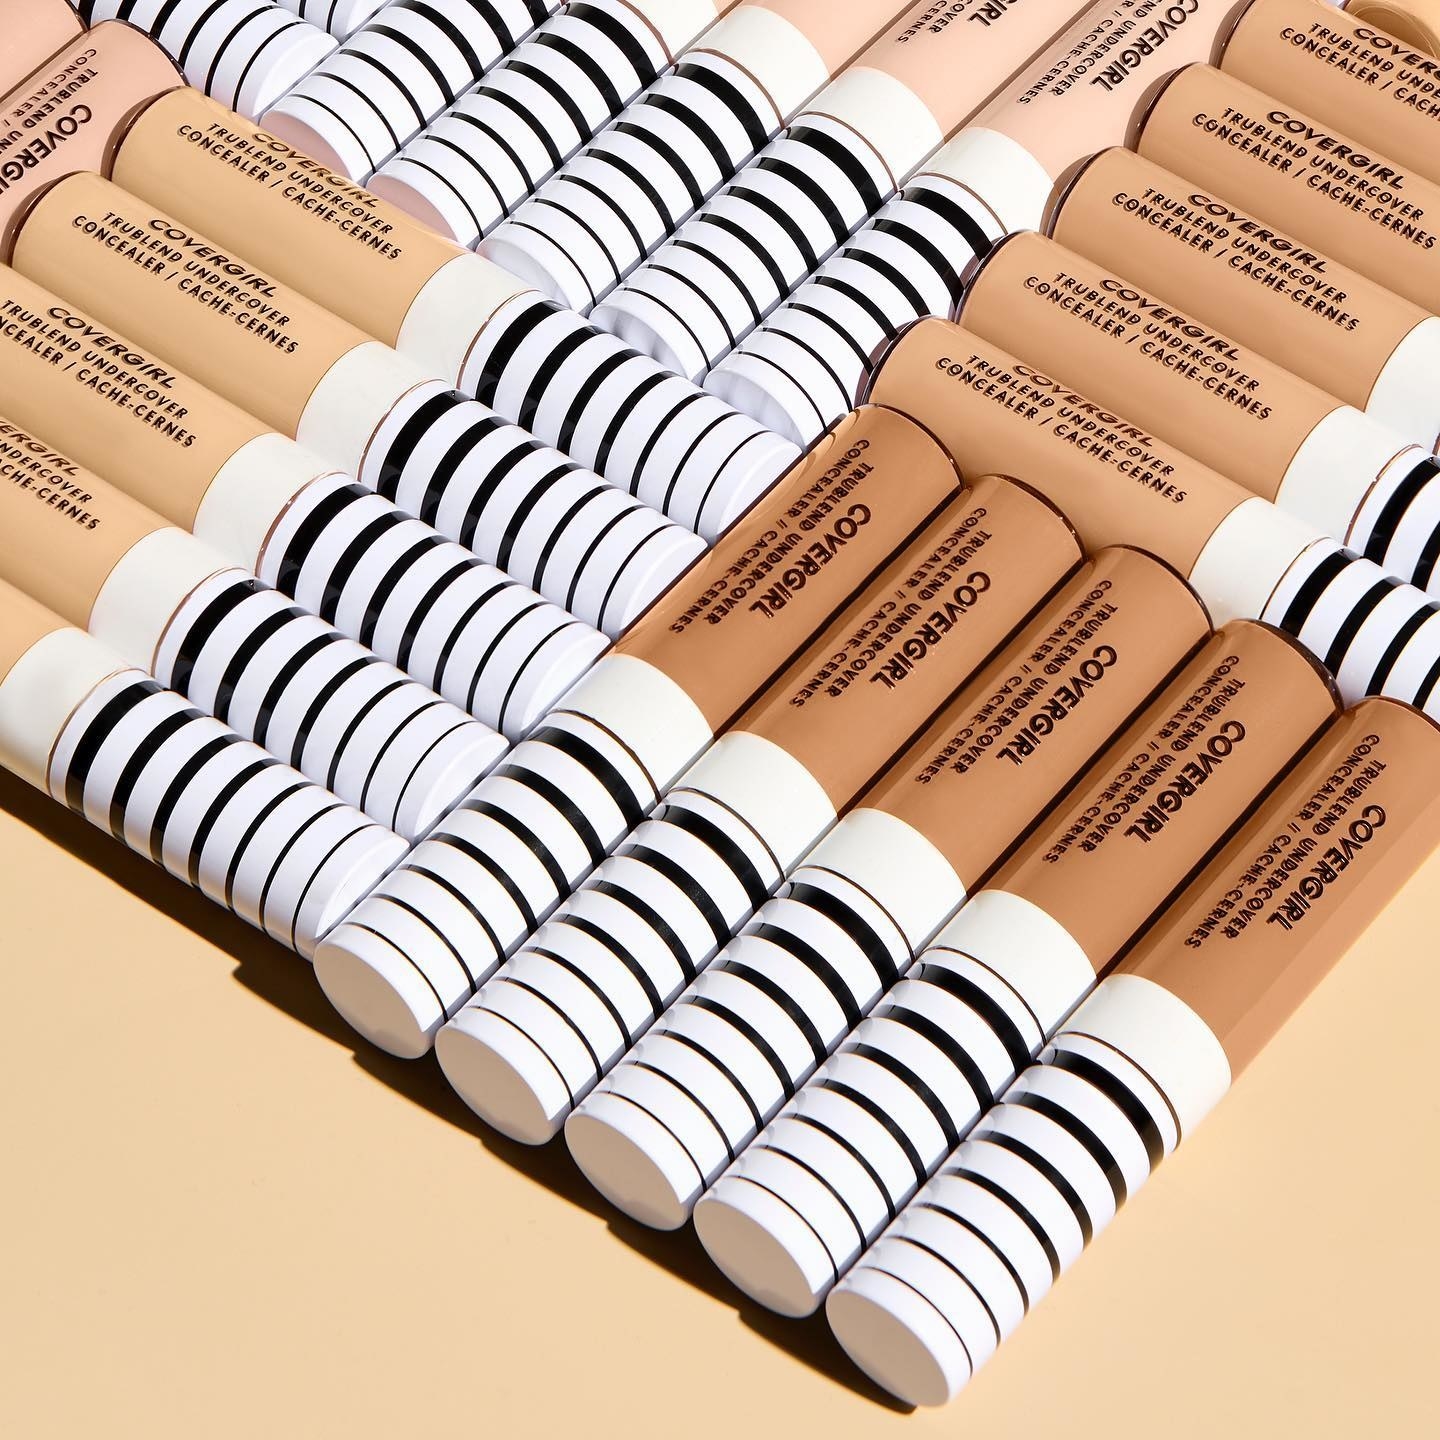 A clear and black and white tube of concealer